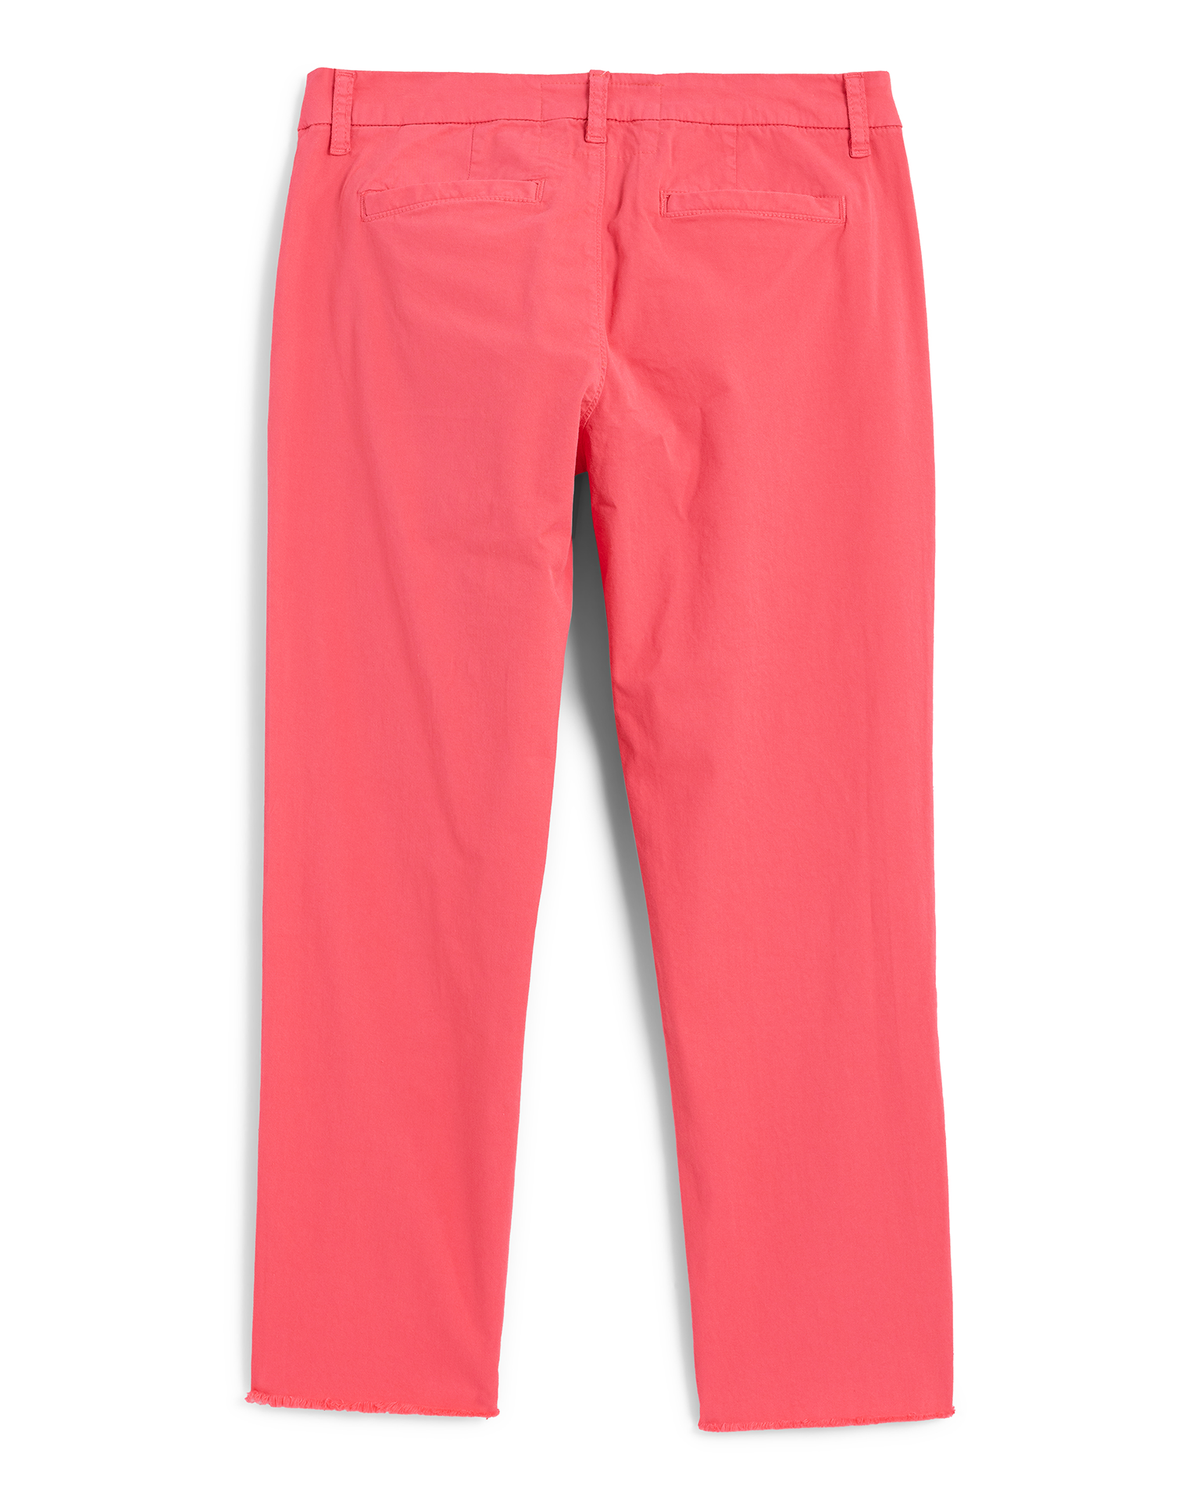 Wicklow Pant in Flushed Pink